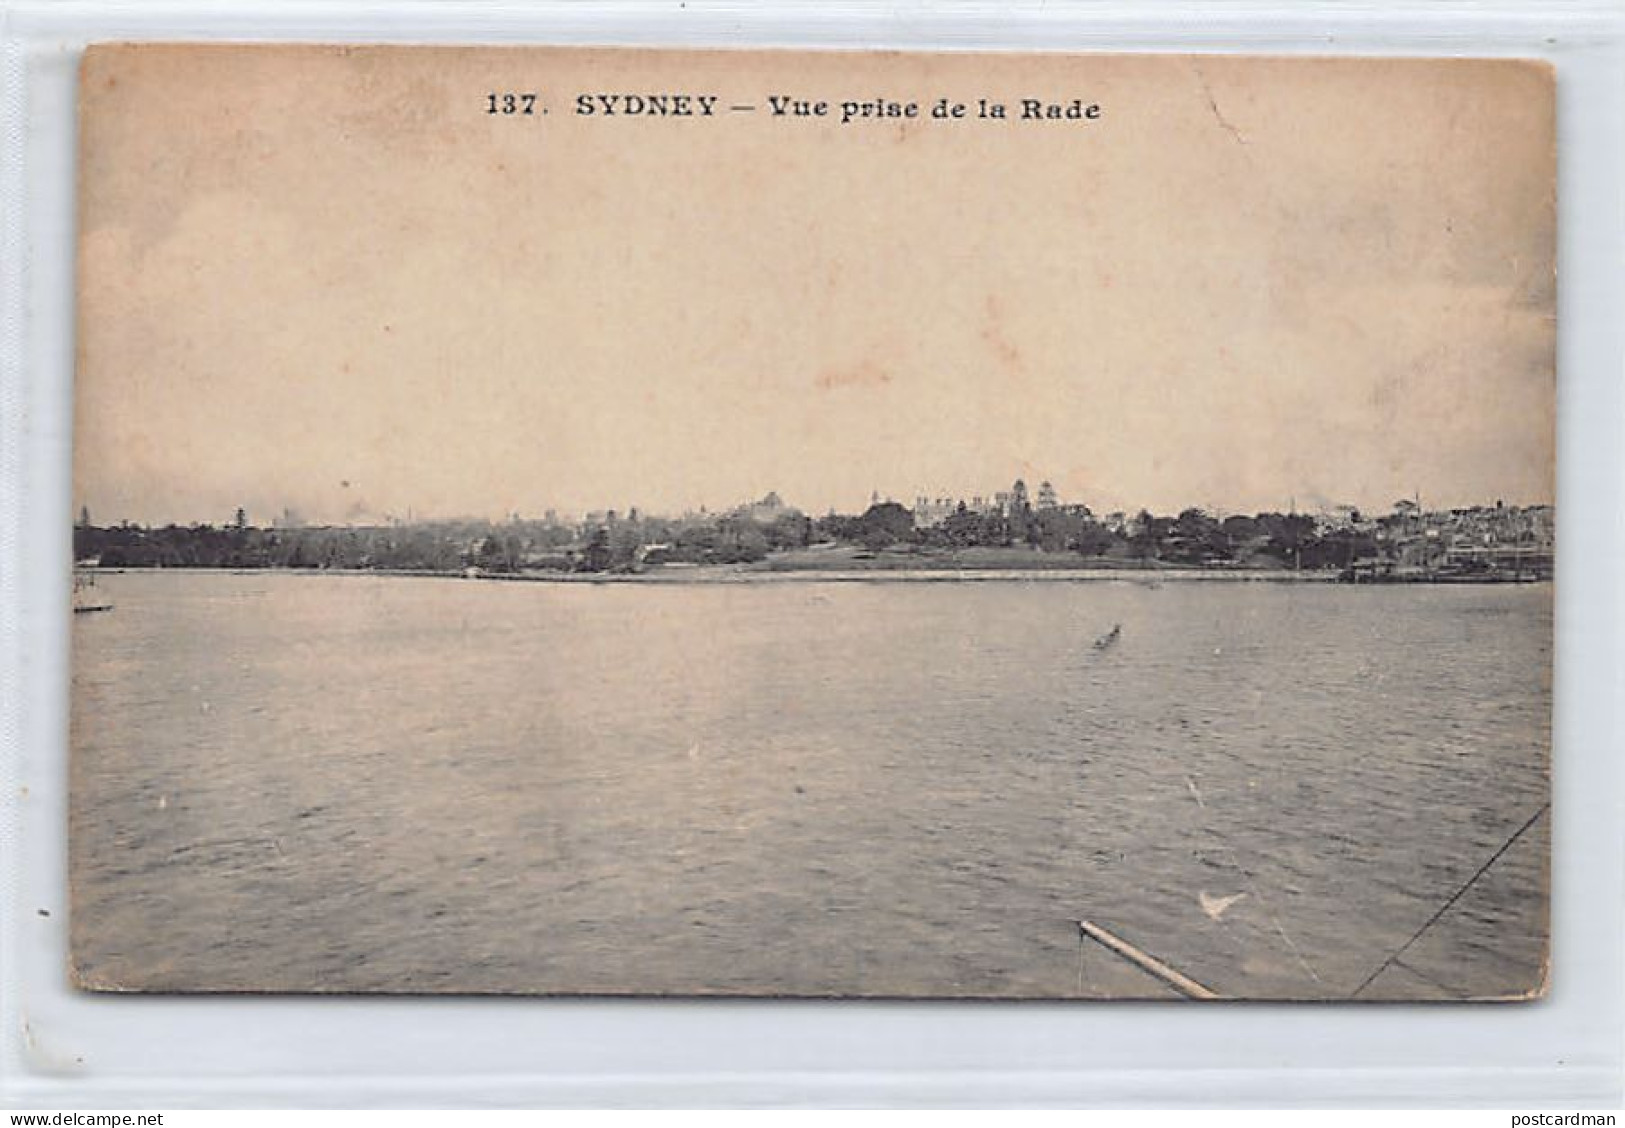 SYDNEY (NSW) View Taken From The Natural Harbour - SEE SCANS FOR CONDITION - Publ. Messageries Maritimes 137 - Sydney